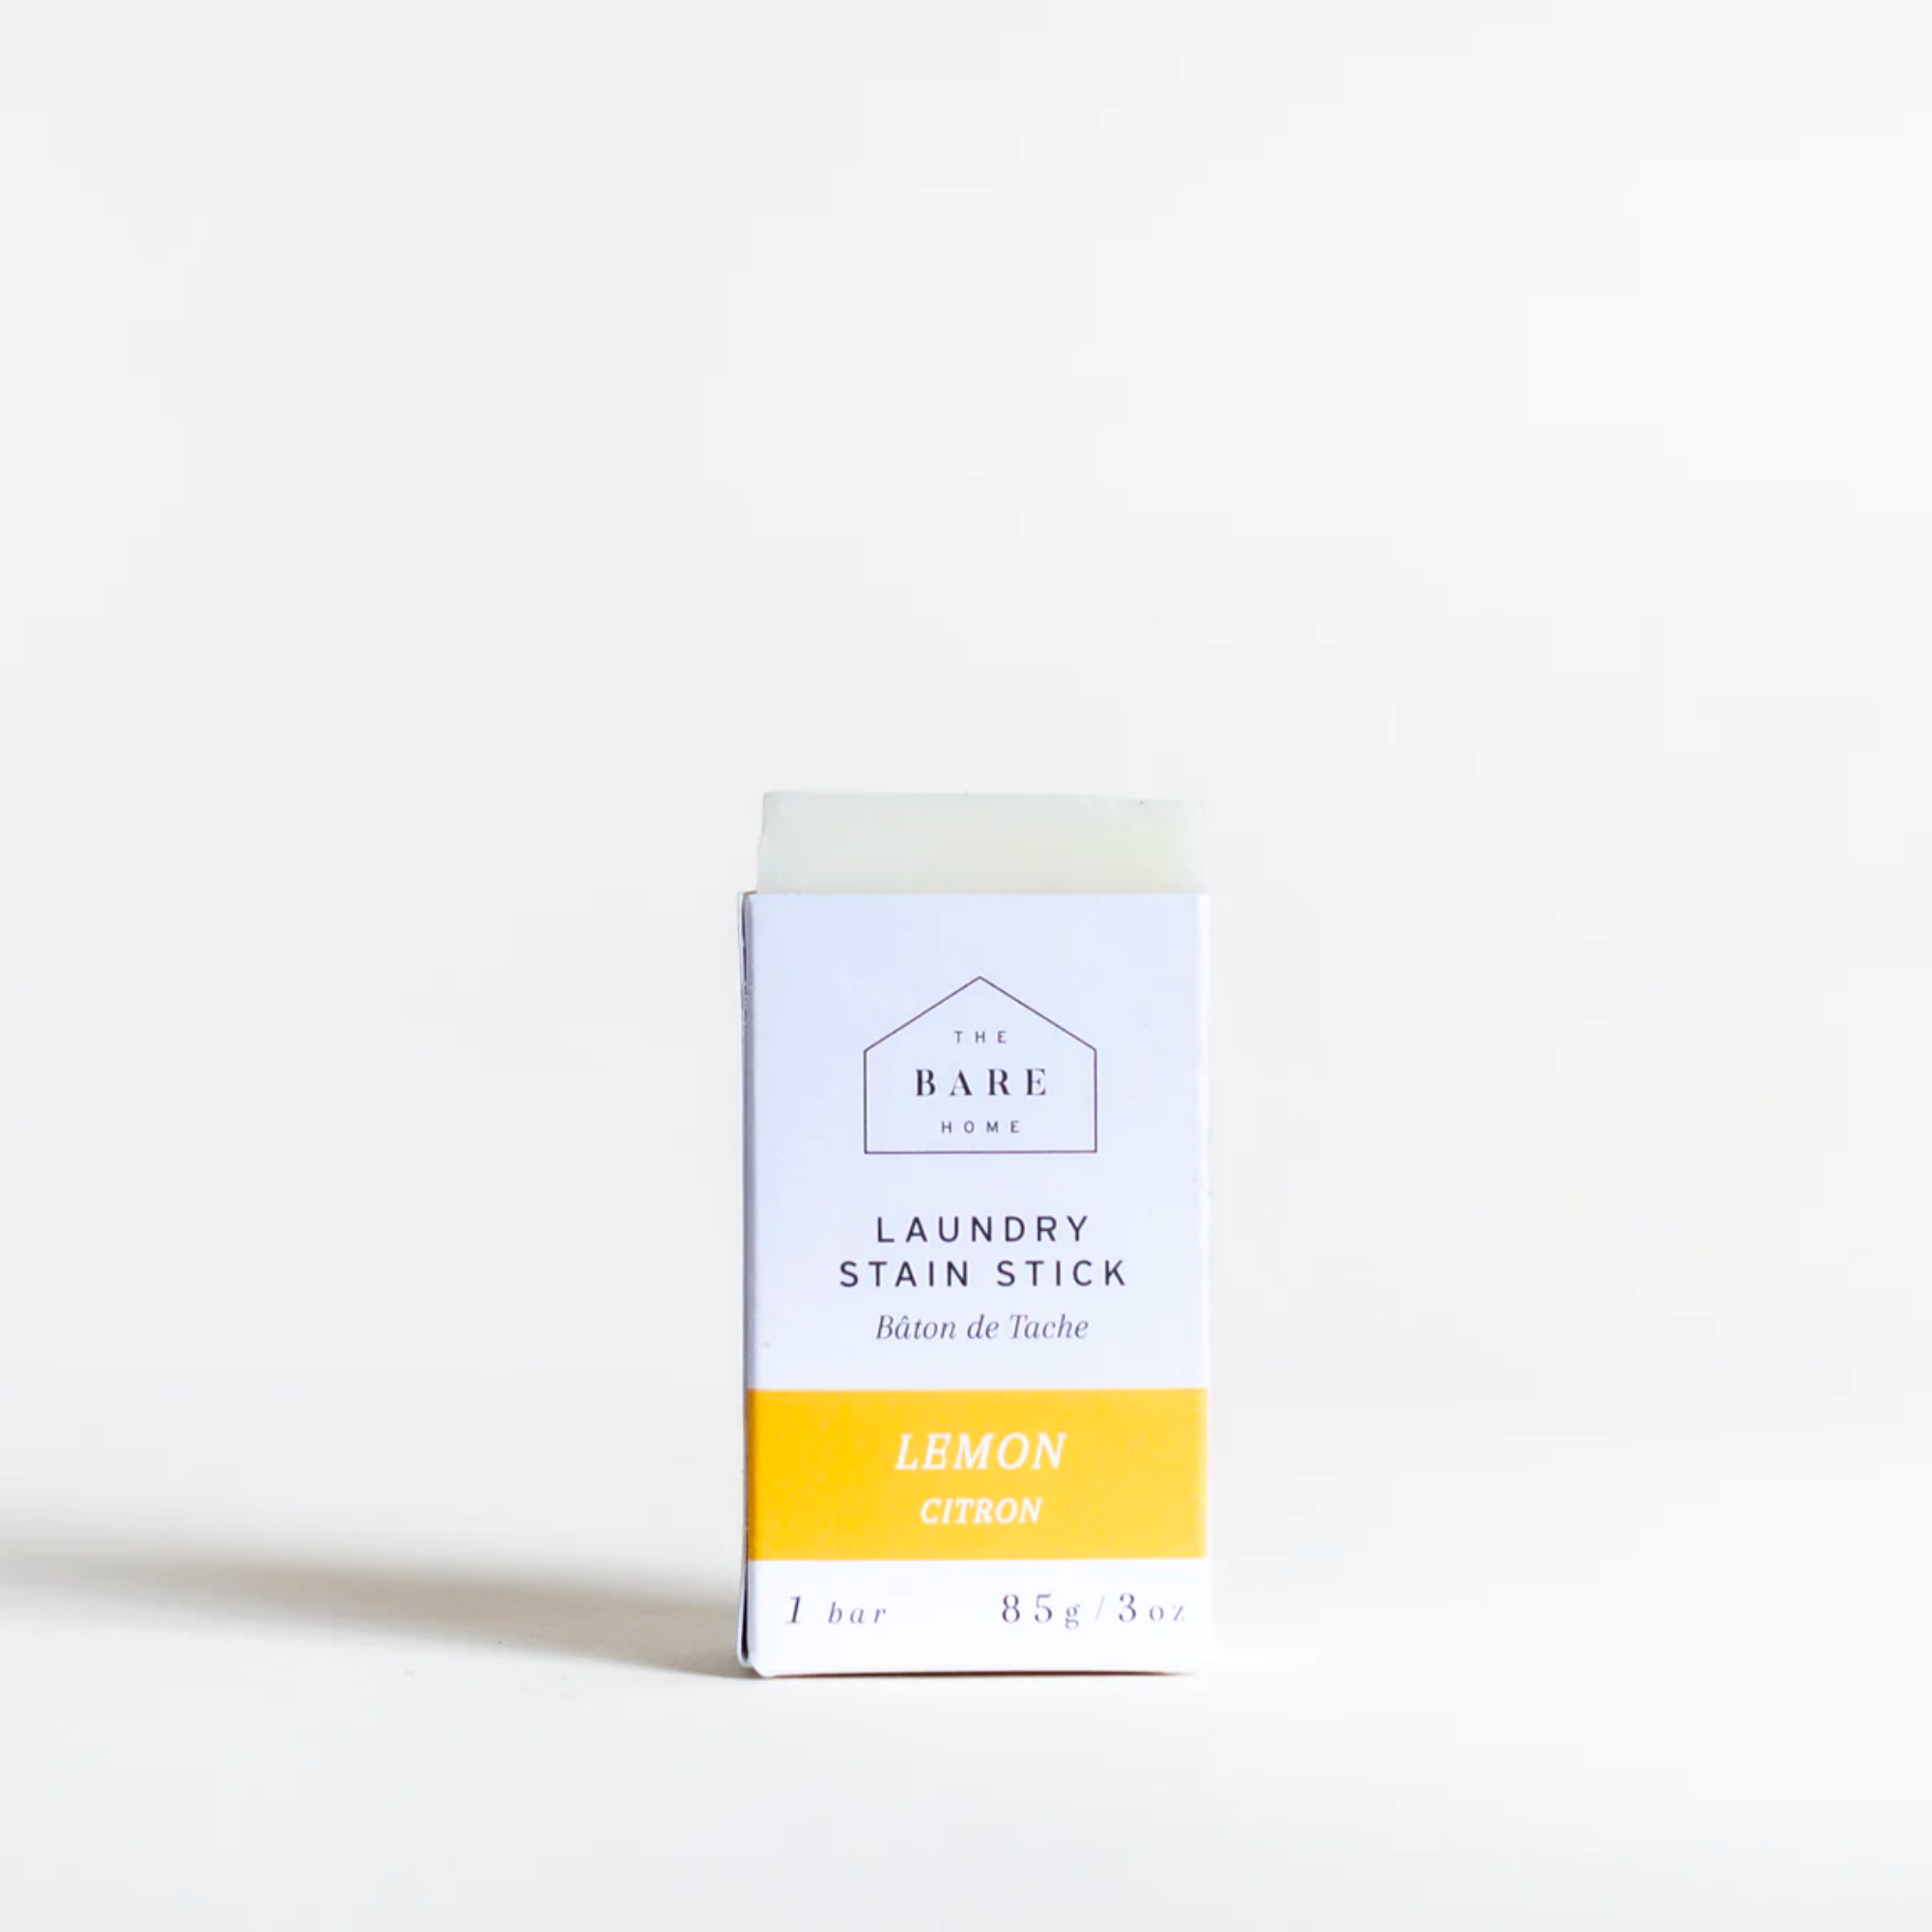 The Bare Home Laundry Stain Stick - Lemon